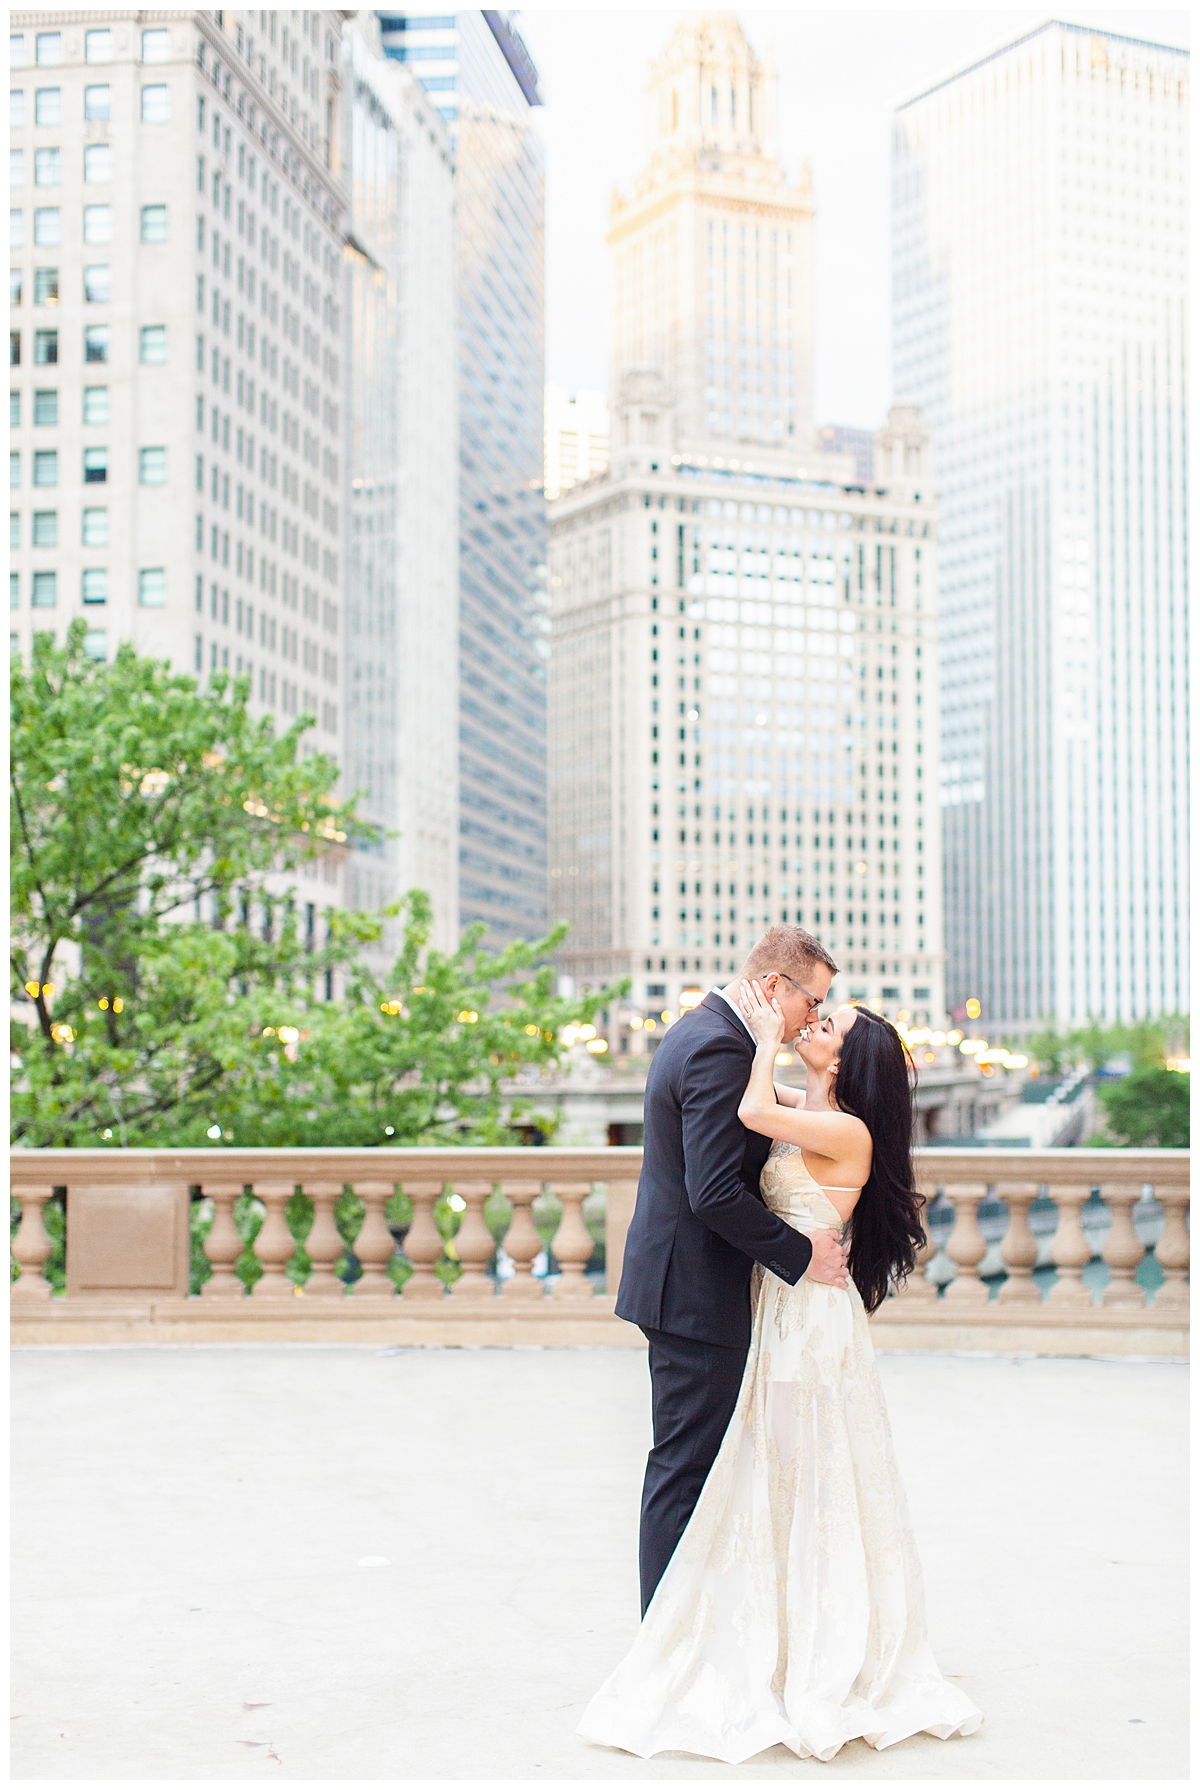 A bride and groom kiss in a wedding portrait at the Wrigley Building in Chicago. The city skyline is in the background. 